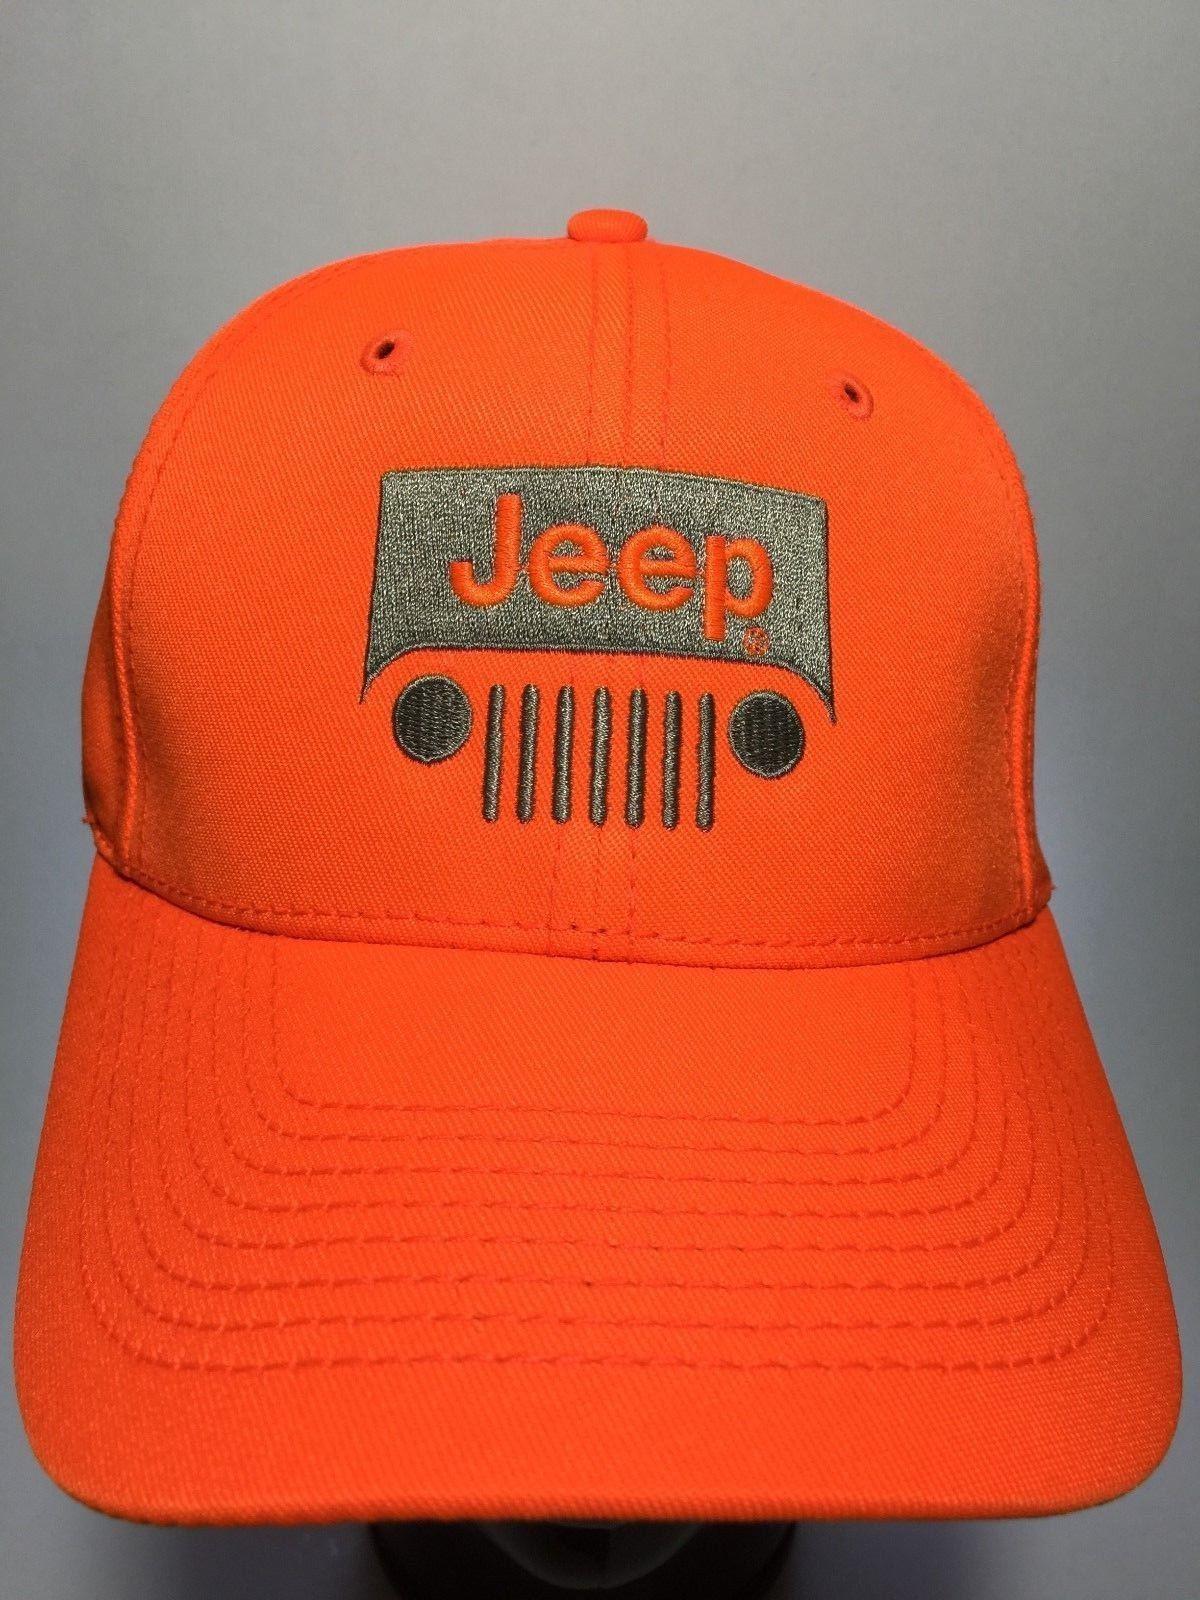 Jeep Grille Hat Logo - Jeep Grille Logo Hat Cap A3 Headwear Adjustable Colors Size in ...